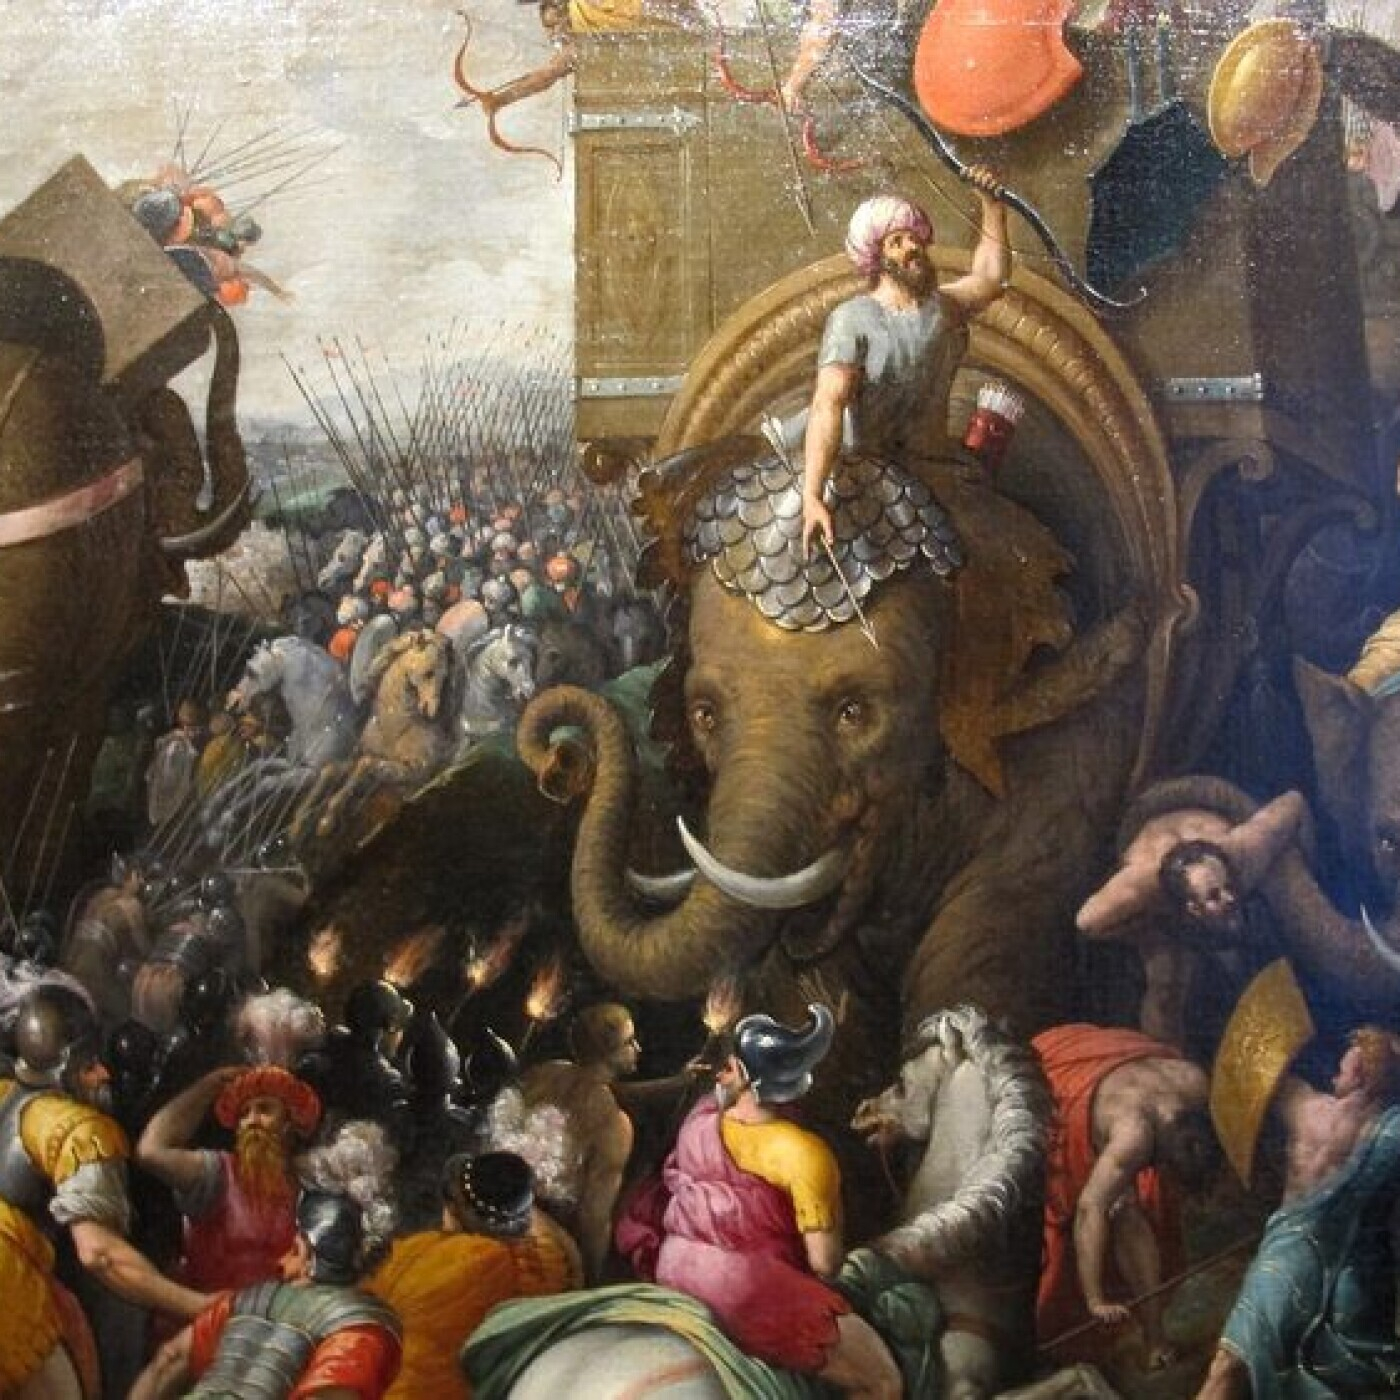 The Battle of Zama - The Beginning of Roman Conquest